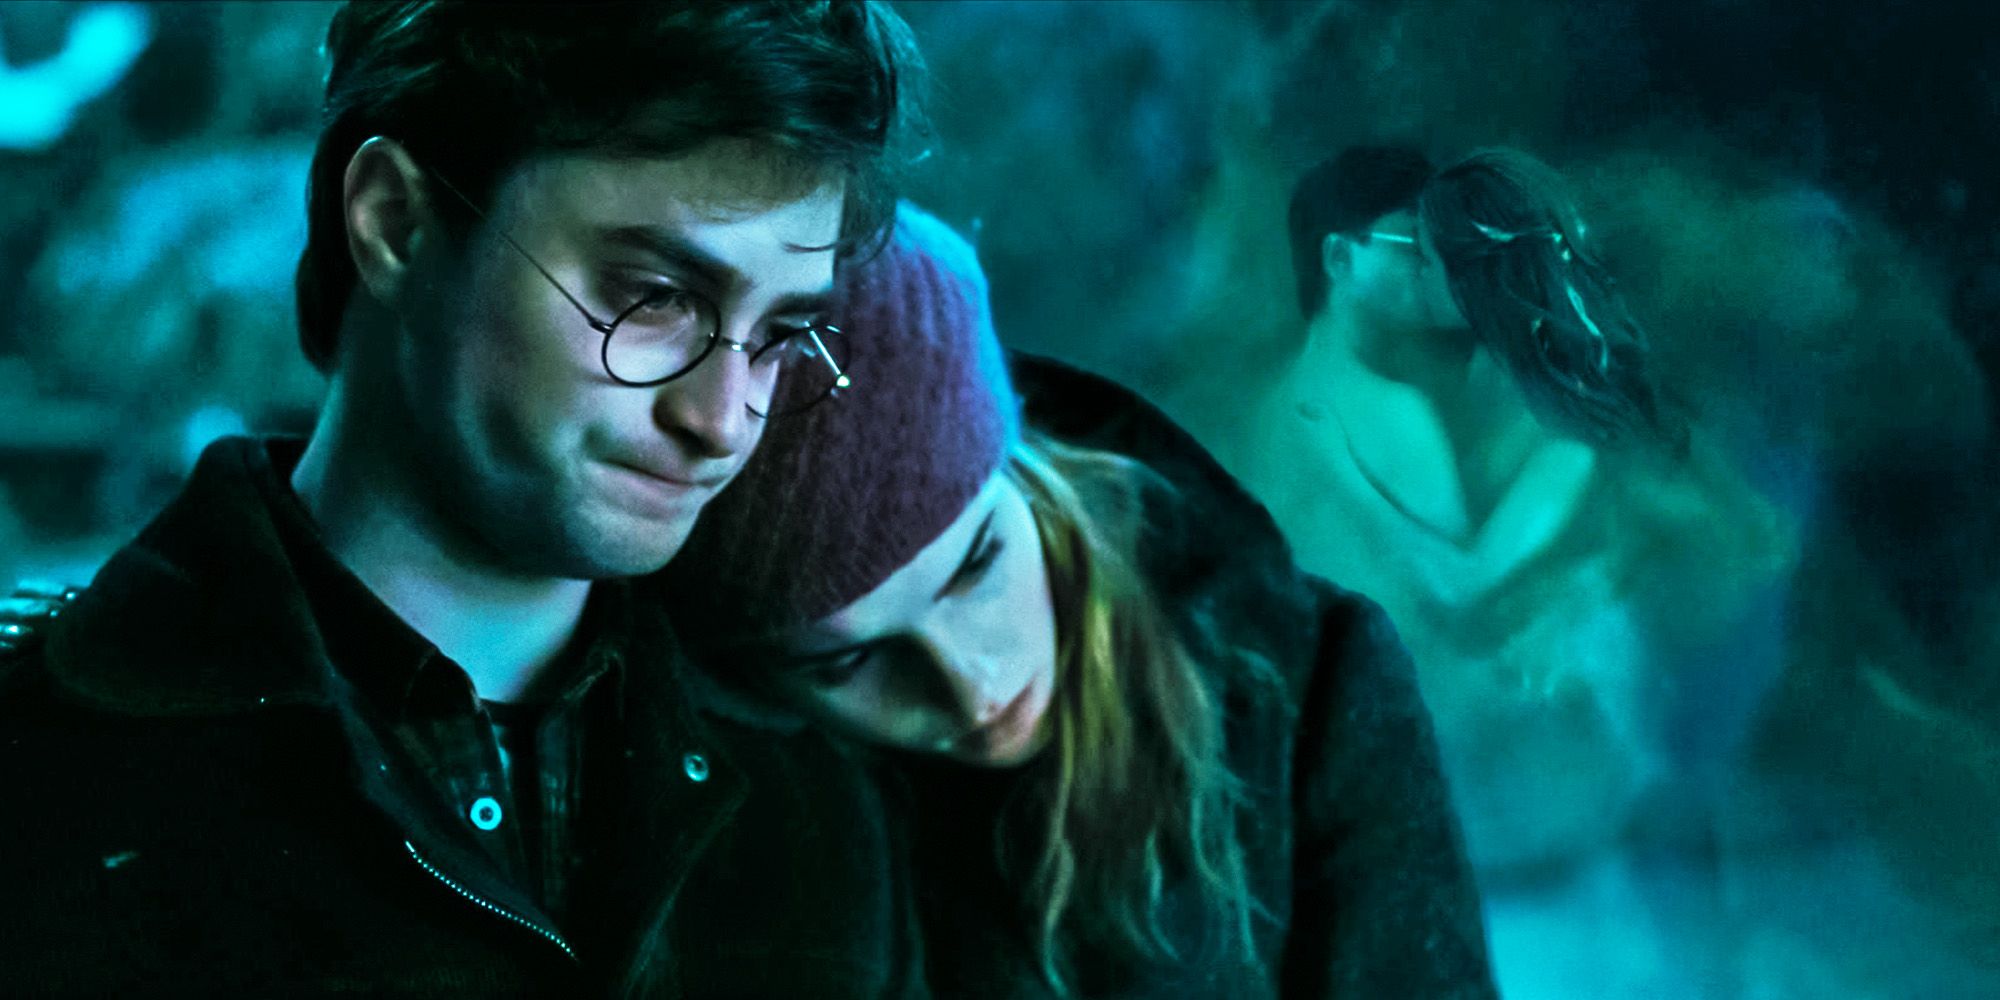 Daniel Radcliffe as Harry Potter and Emma Watson as Hermione Grainger in The Deathly Hallows